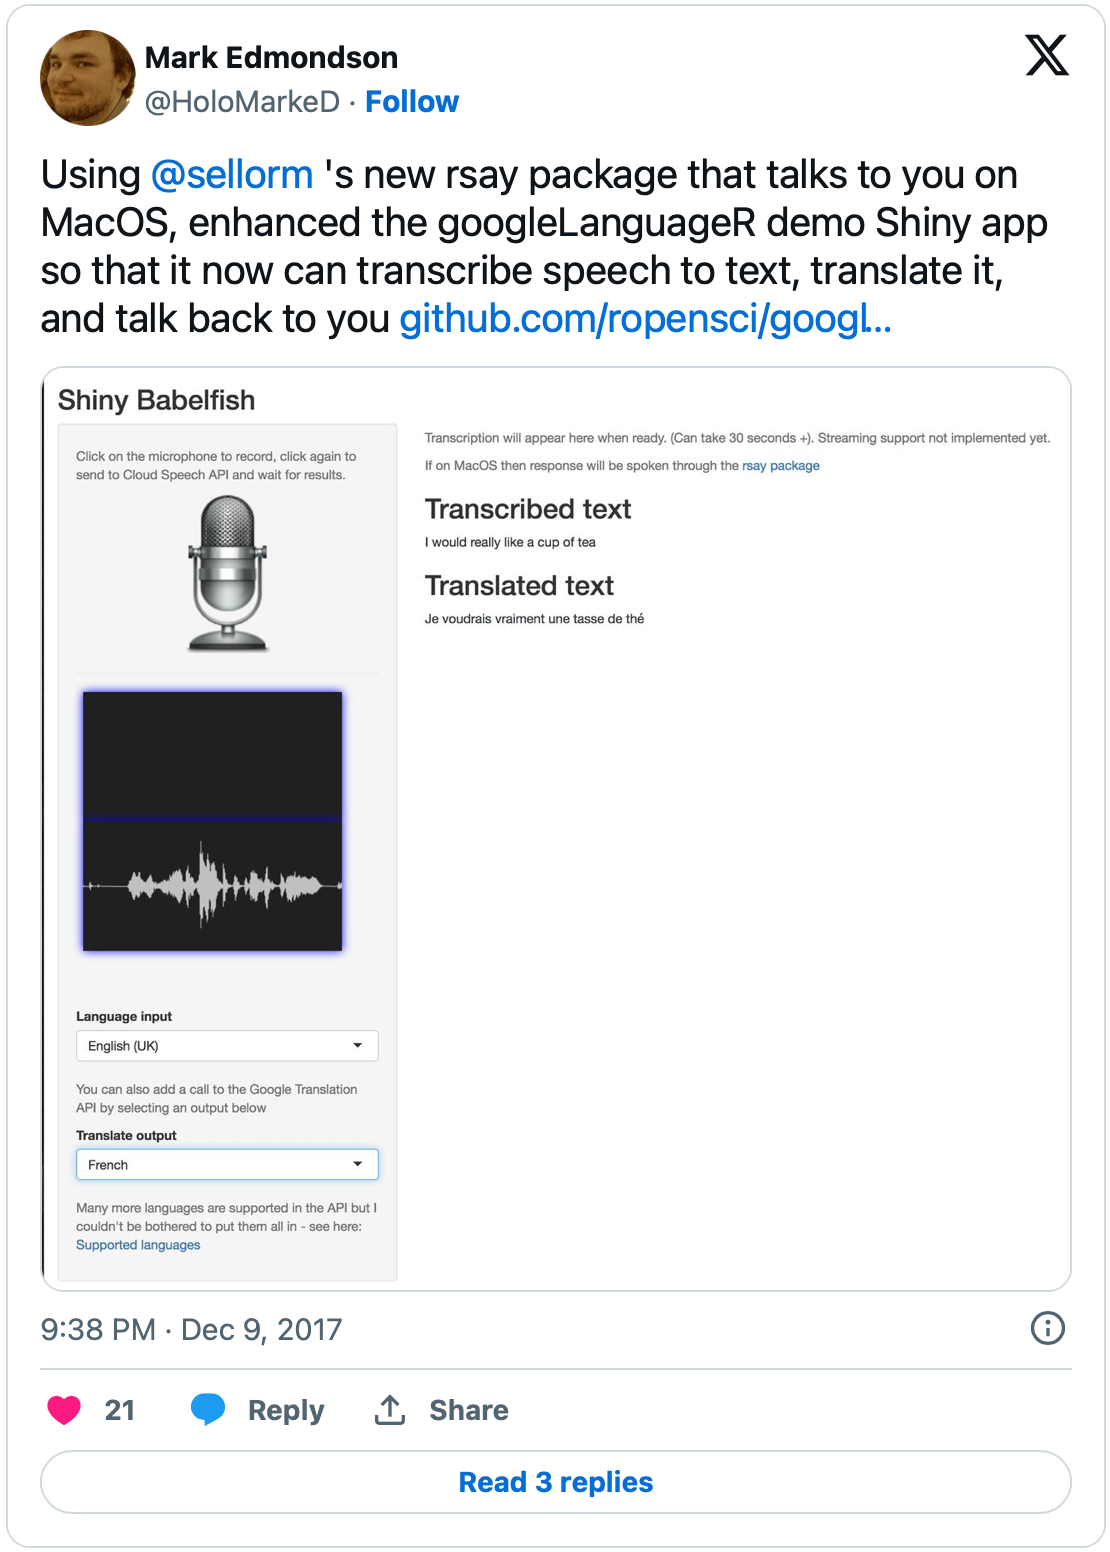 Tweet from Mark Edmondson (@HoloMarkeD  2017-12-09): Using sellorm's new rsay package that talks to you on MacOS, enhanced the googleLanguageR demo Shiny app so that it can transcribe speech to text, translate it, and talk back to you https://github.com/ropensci/googleLanguageR/tree/master/inst/shiny/capture_speech There is a screenshot of the app underneath.